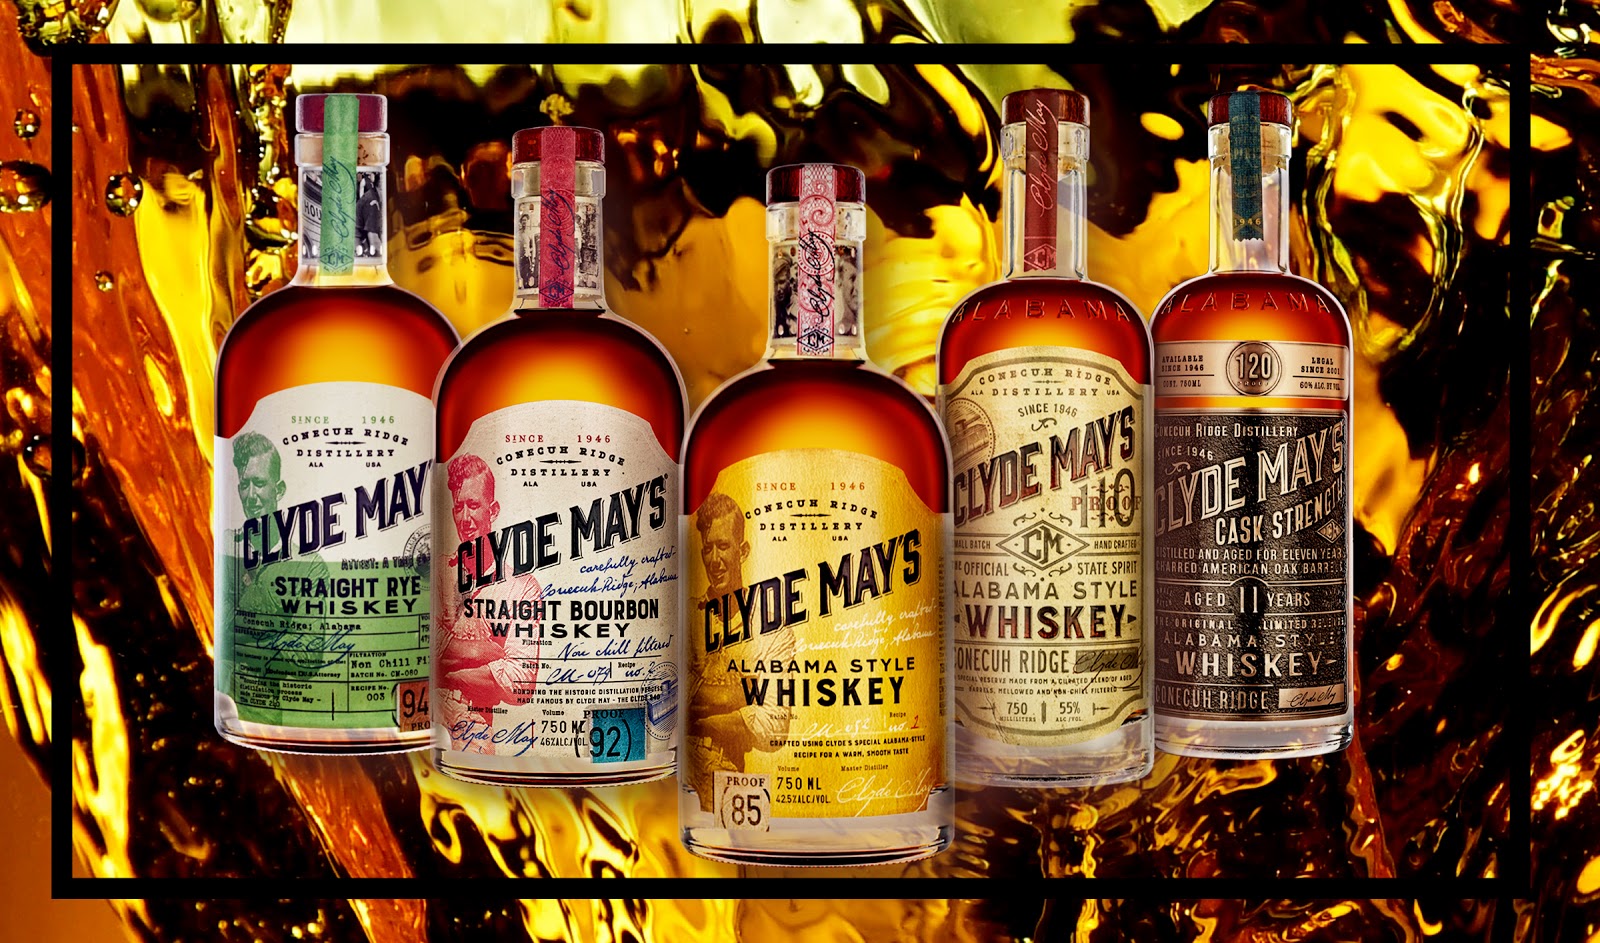 Clyde May's Whiskey Variations Bottles